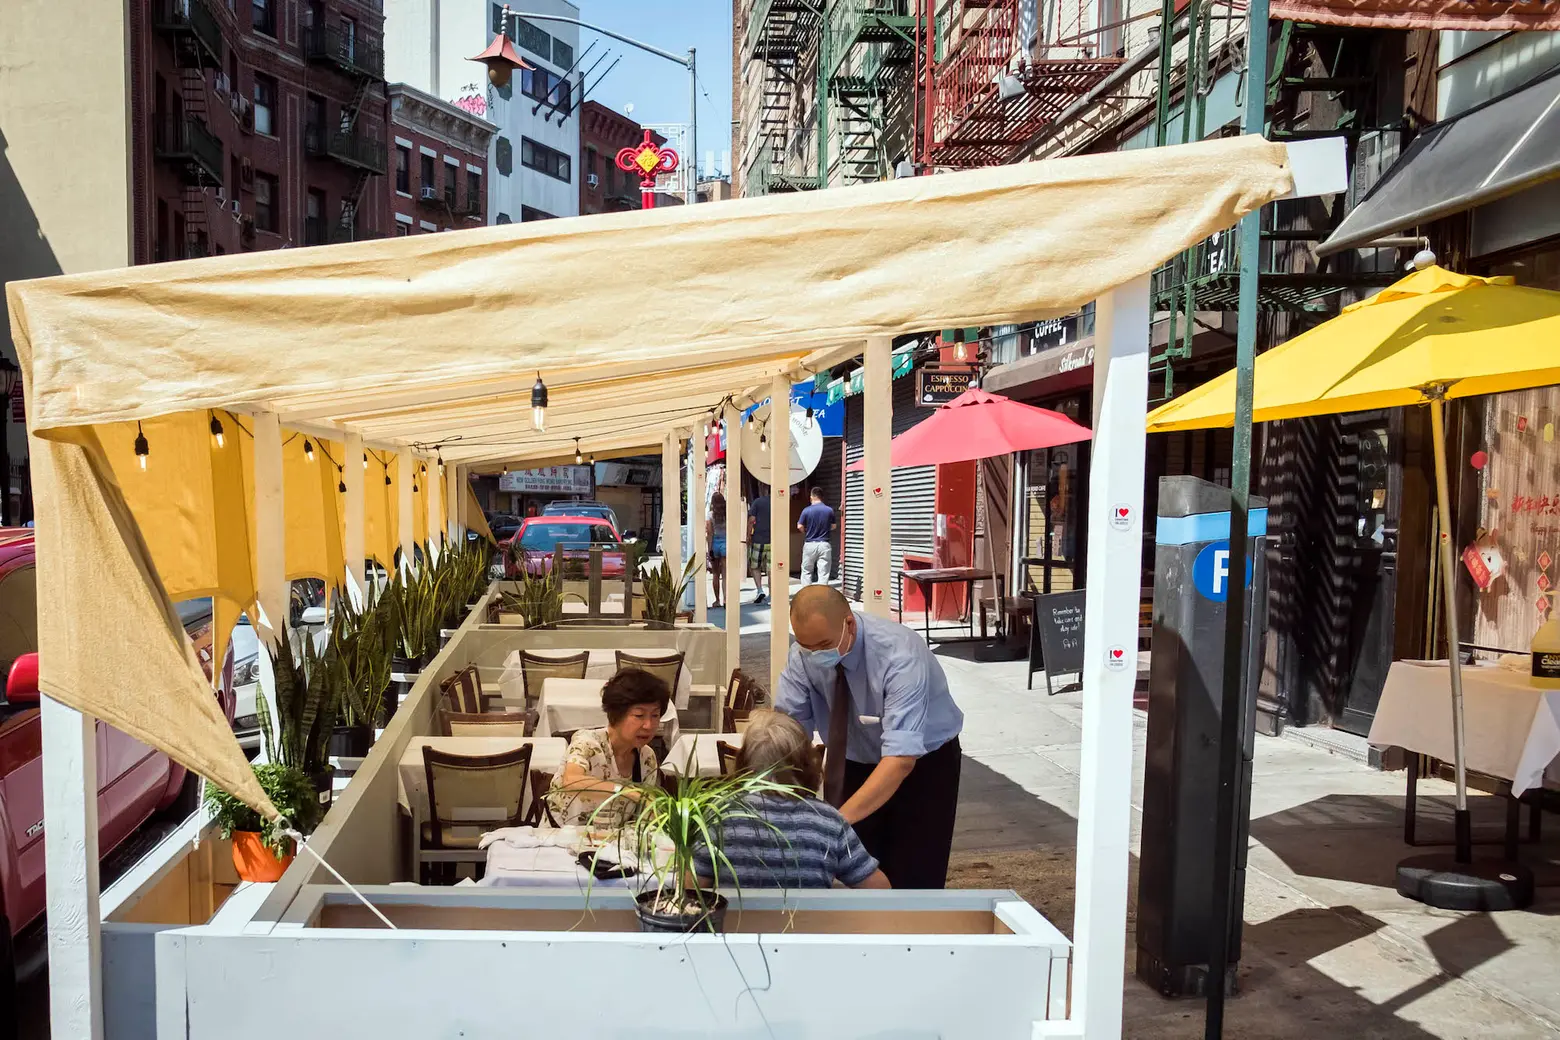 New program asks architects to help design outdoor dining spaces for NYC restaurants